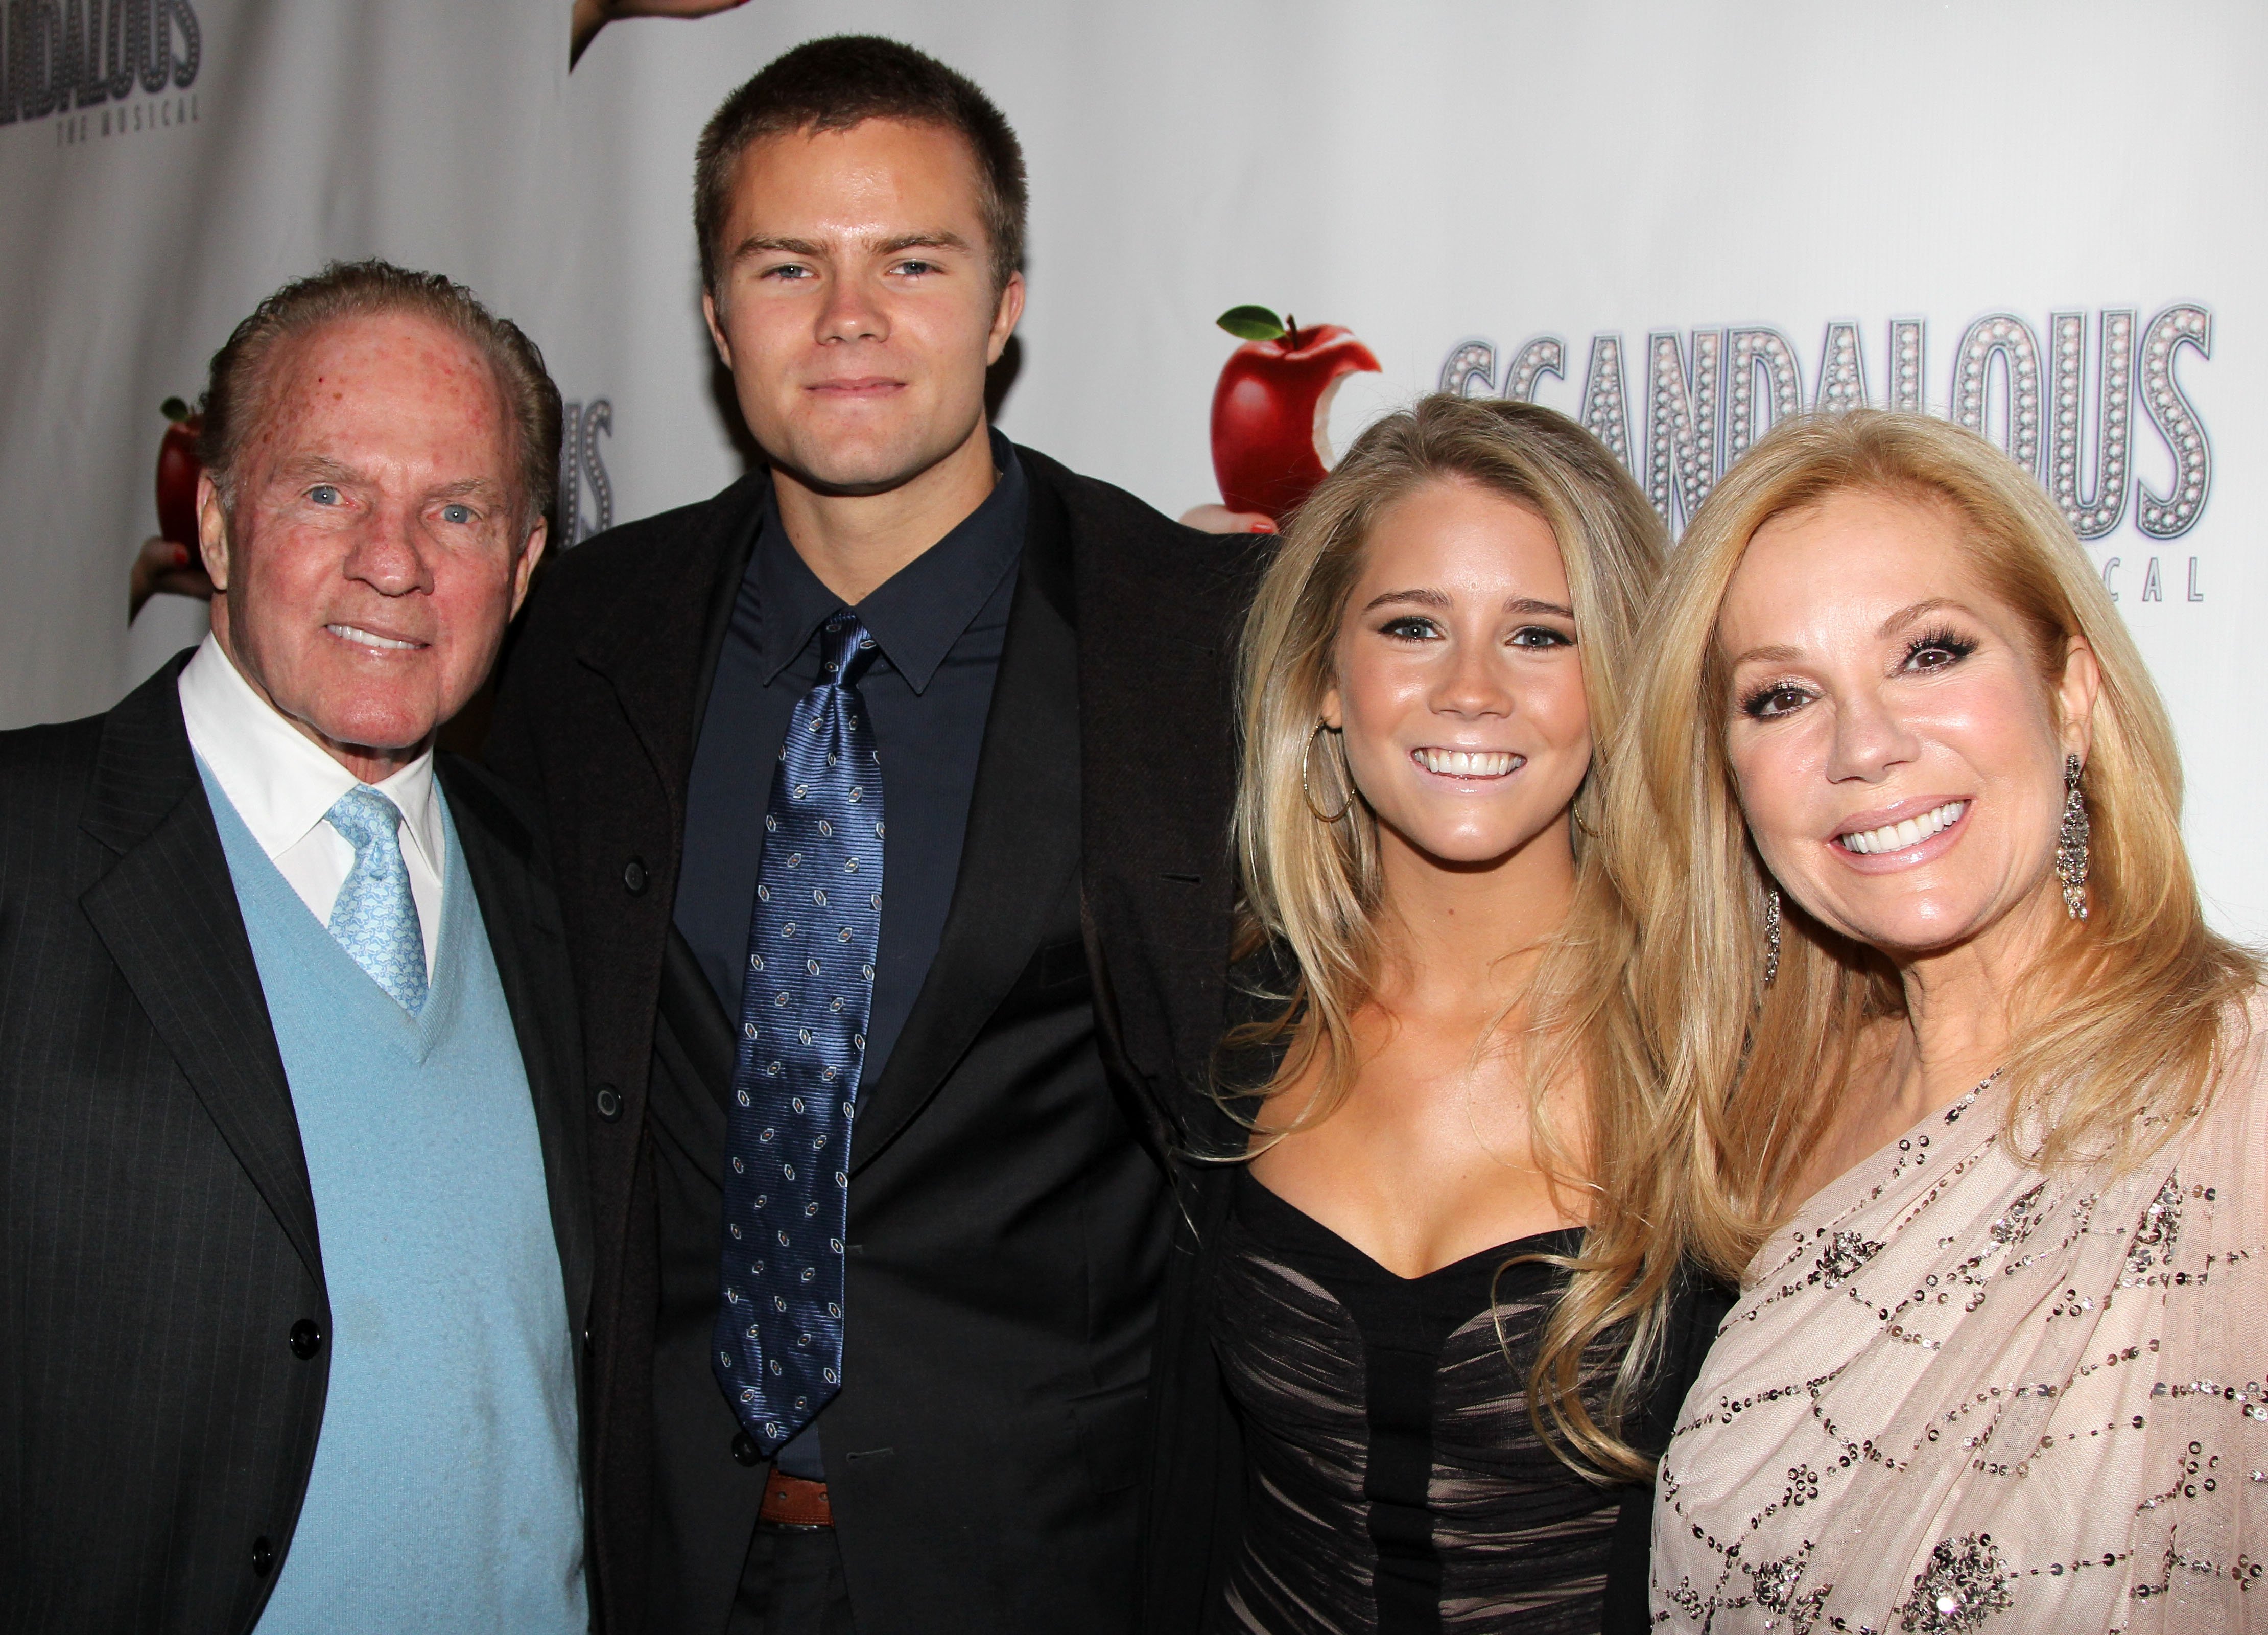 Frank, Cody, Cassidy, and Kathie Lee Gifford at the opening night of 